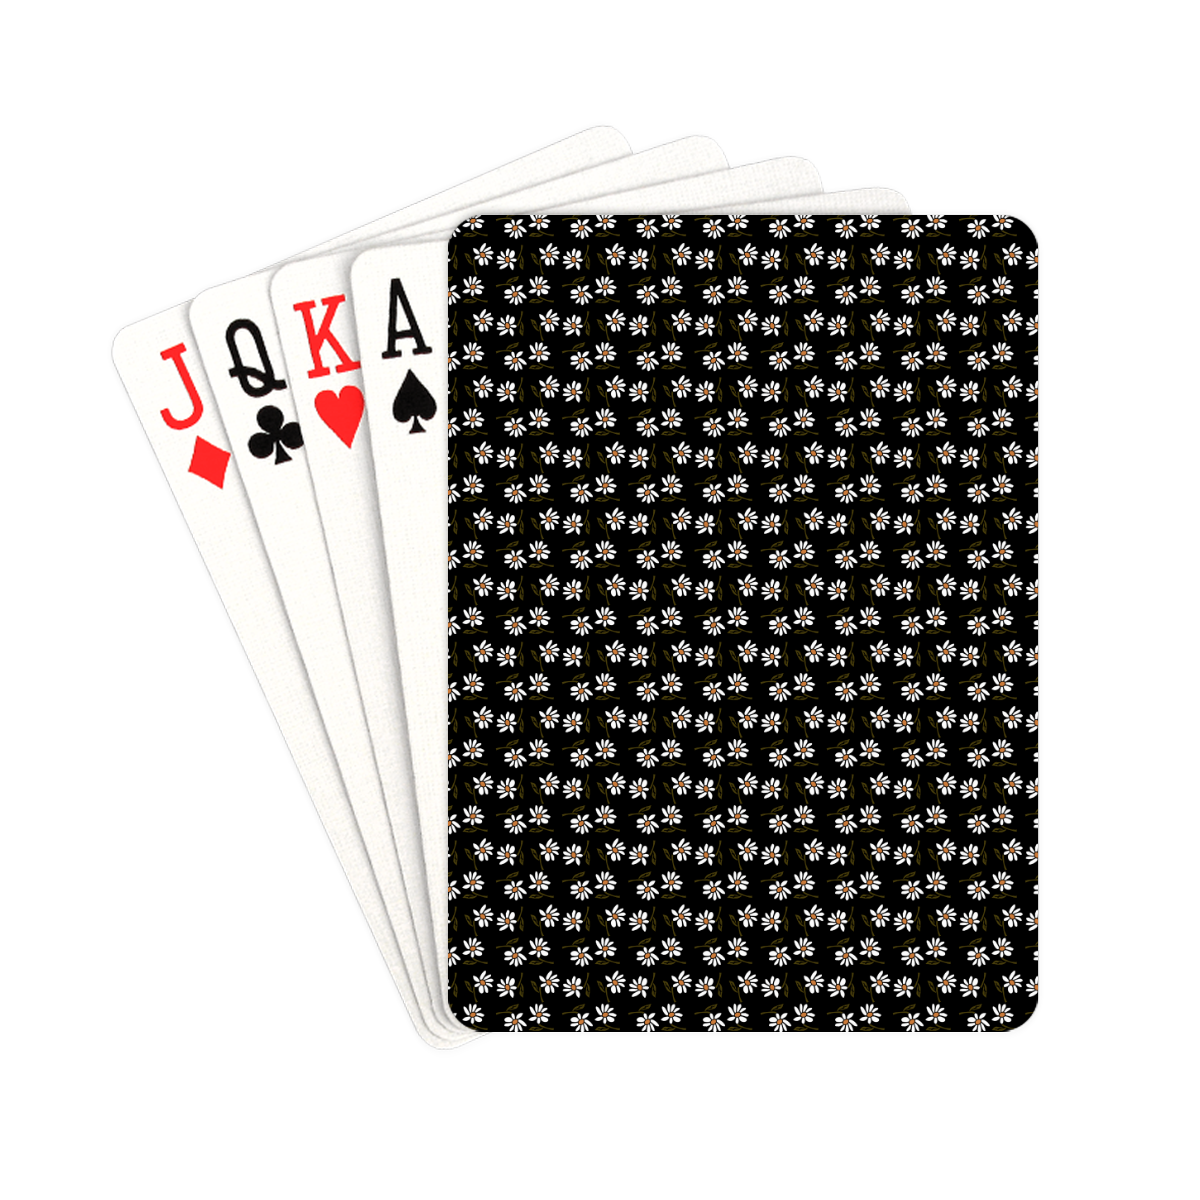 daisy black Playing Cards 2.5"x3.5"